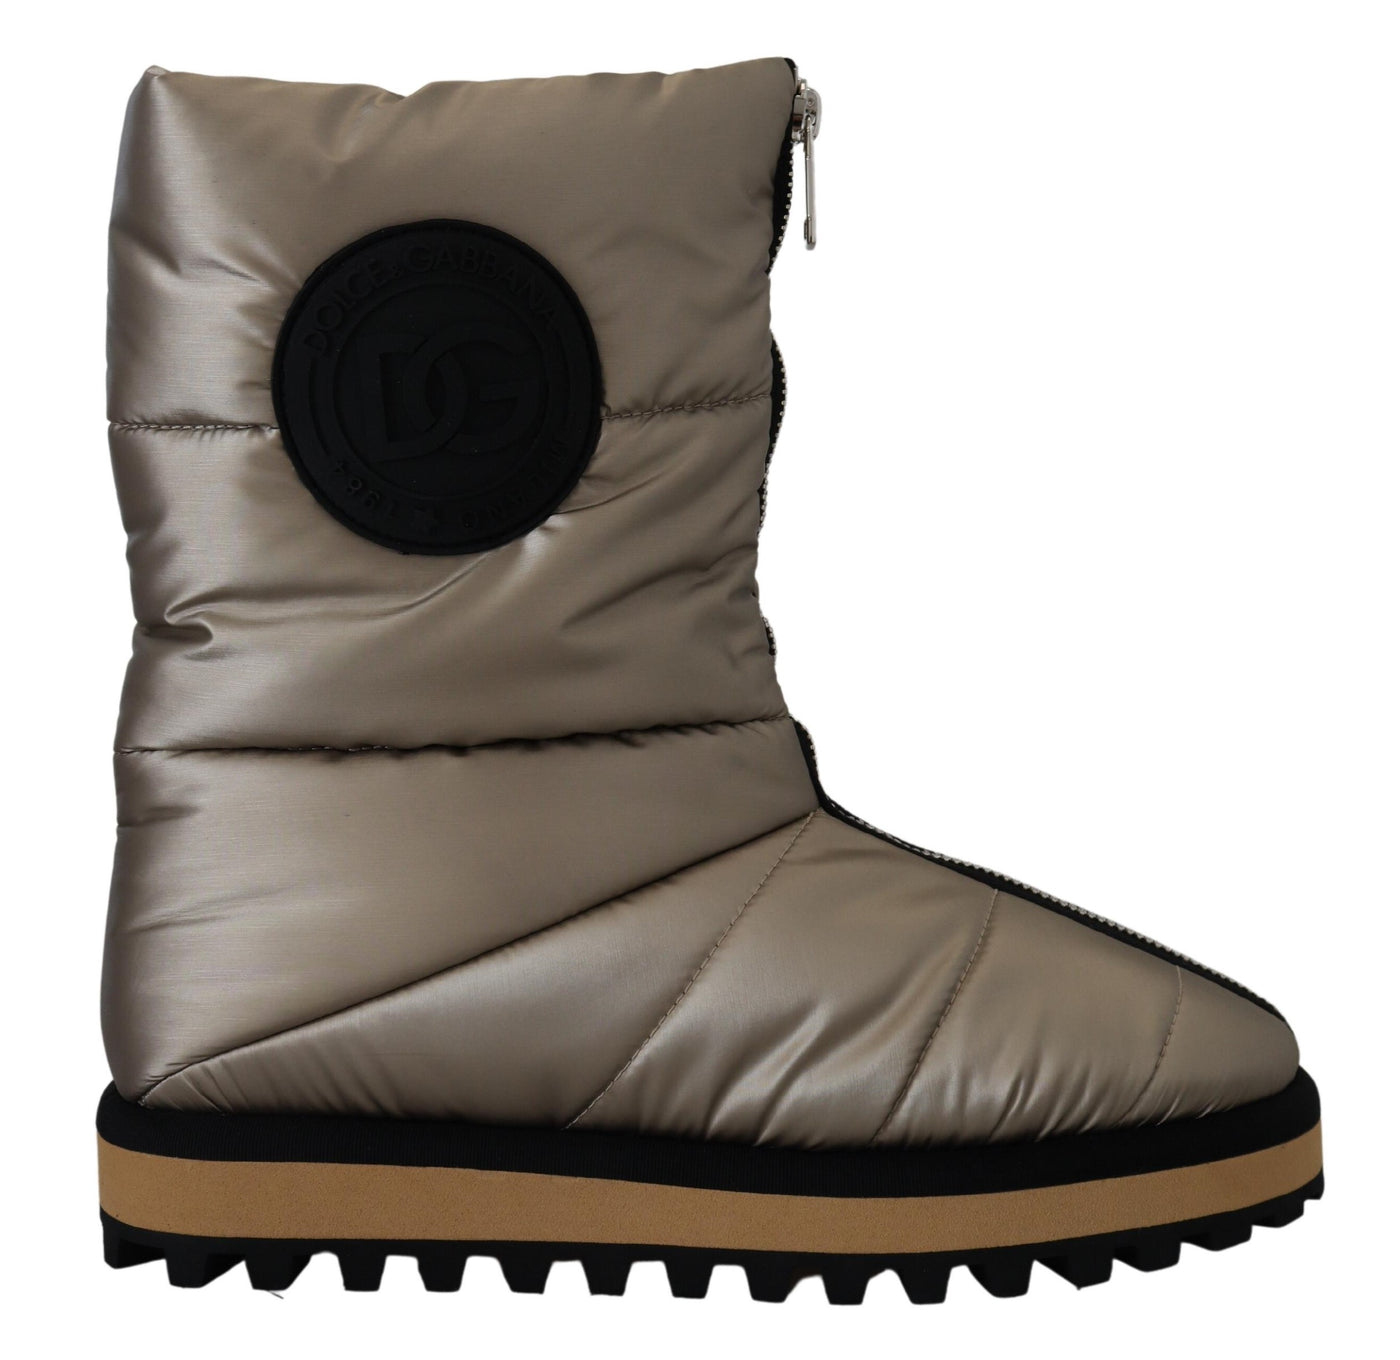 Dolce & Gabbana Silver Padded Mid Calf Winter Shoes  Boots